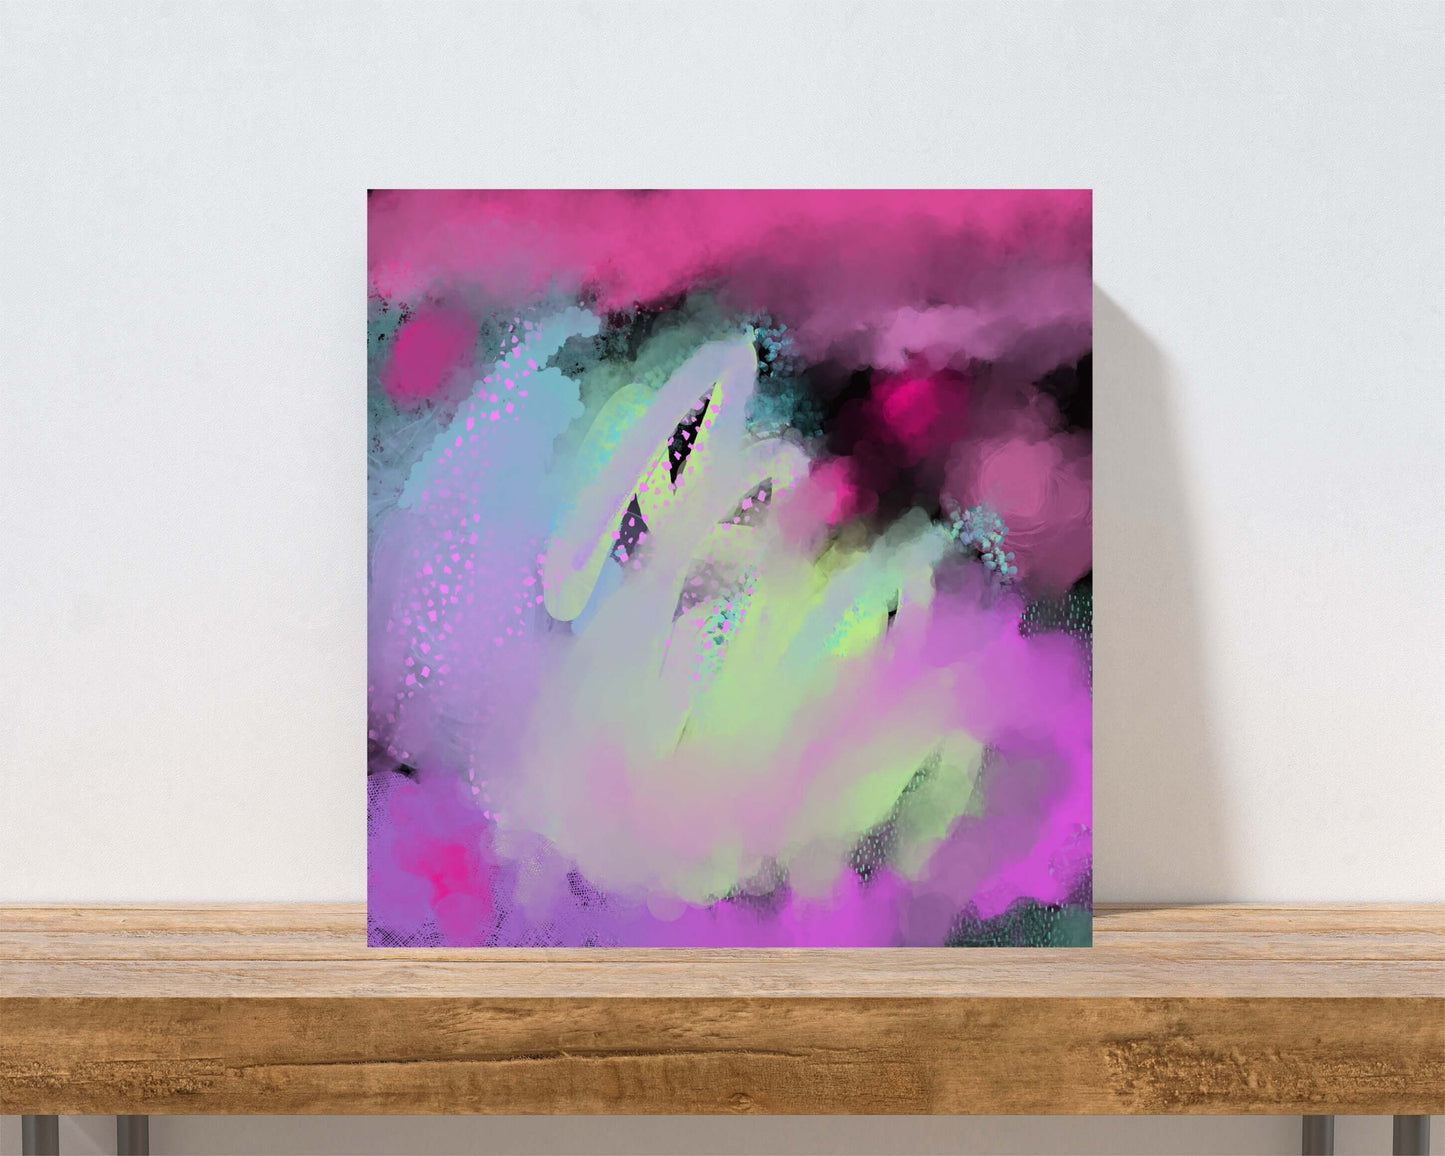 Magenta, Mint Green and Purples “Ode to Viva Magenta” Abstract Art Canvas Print Wall Art Small Canvas on Shelf